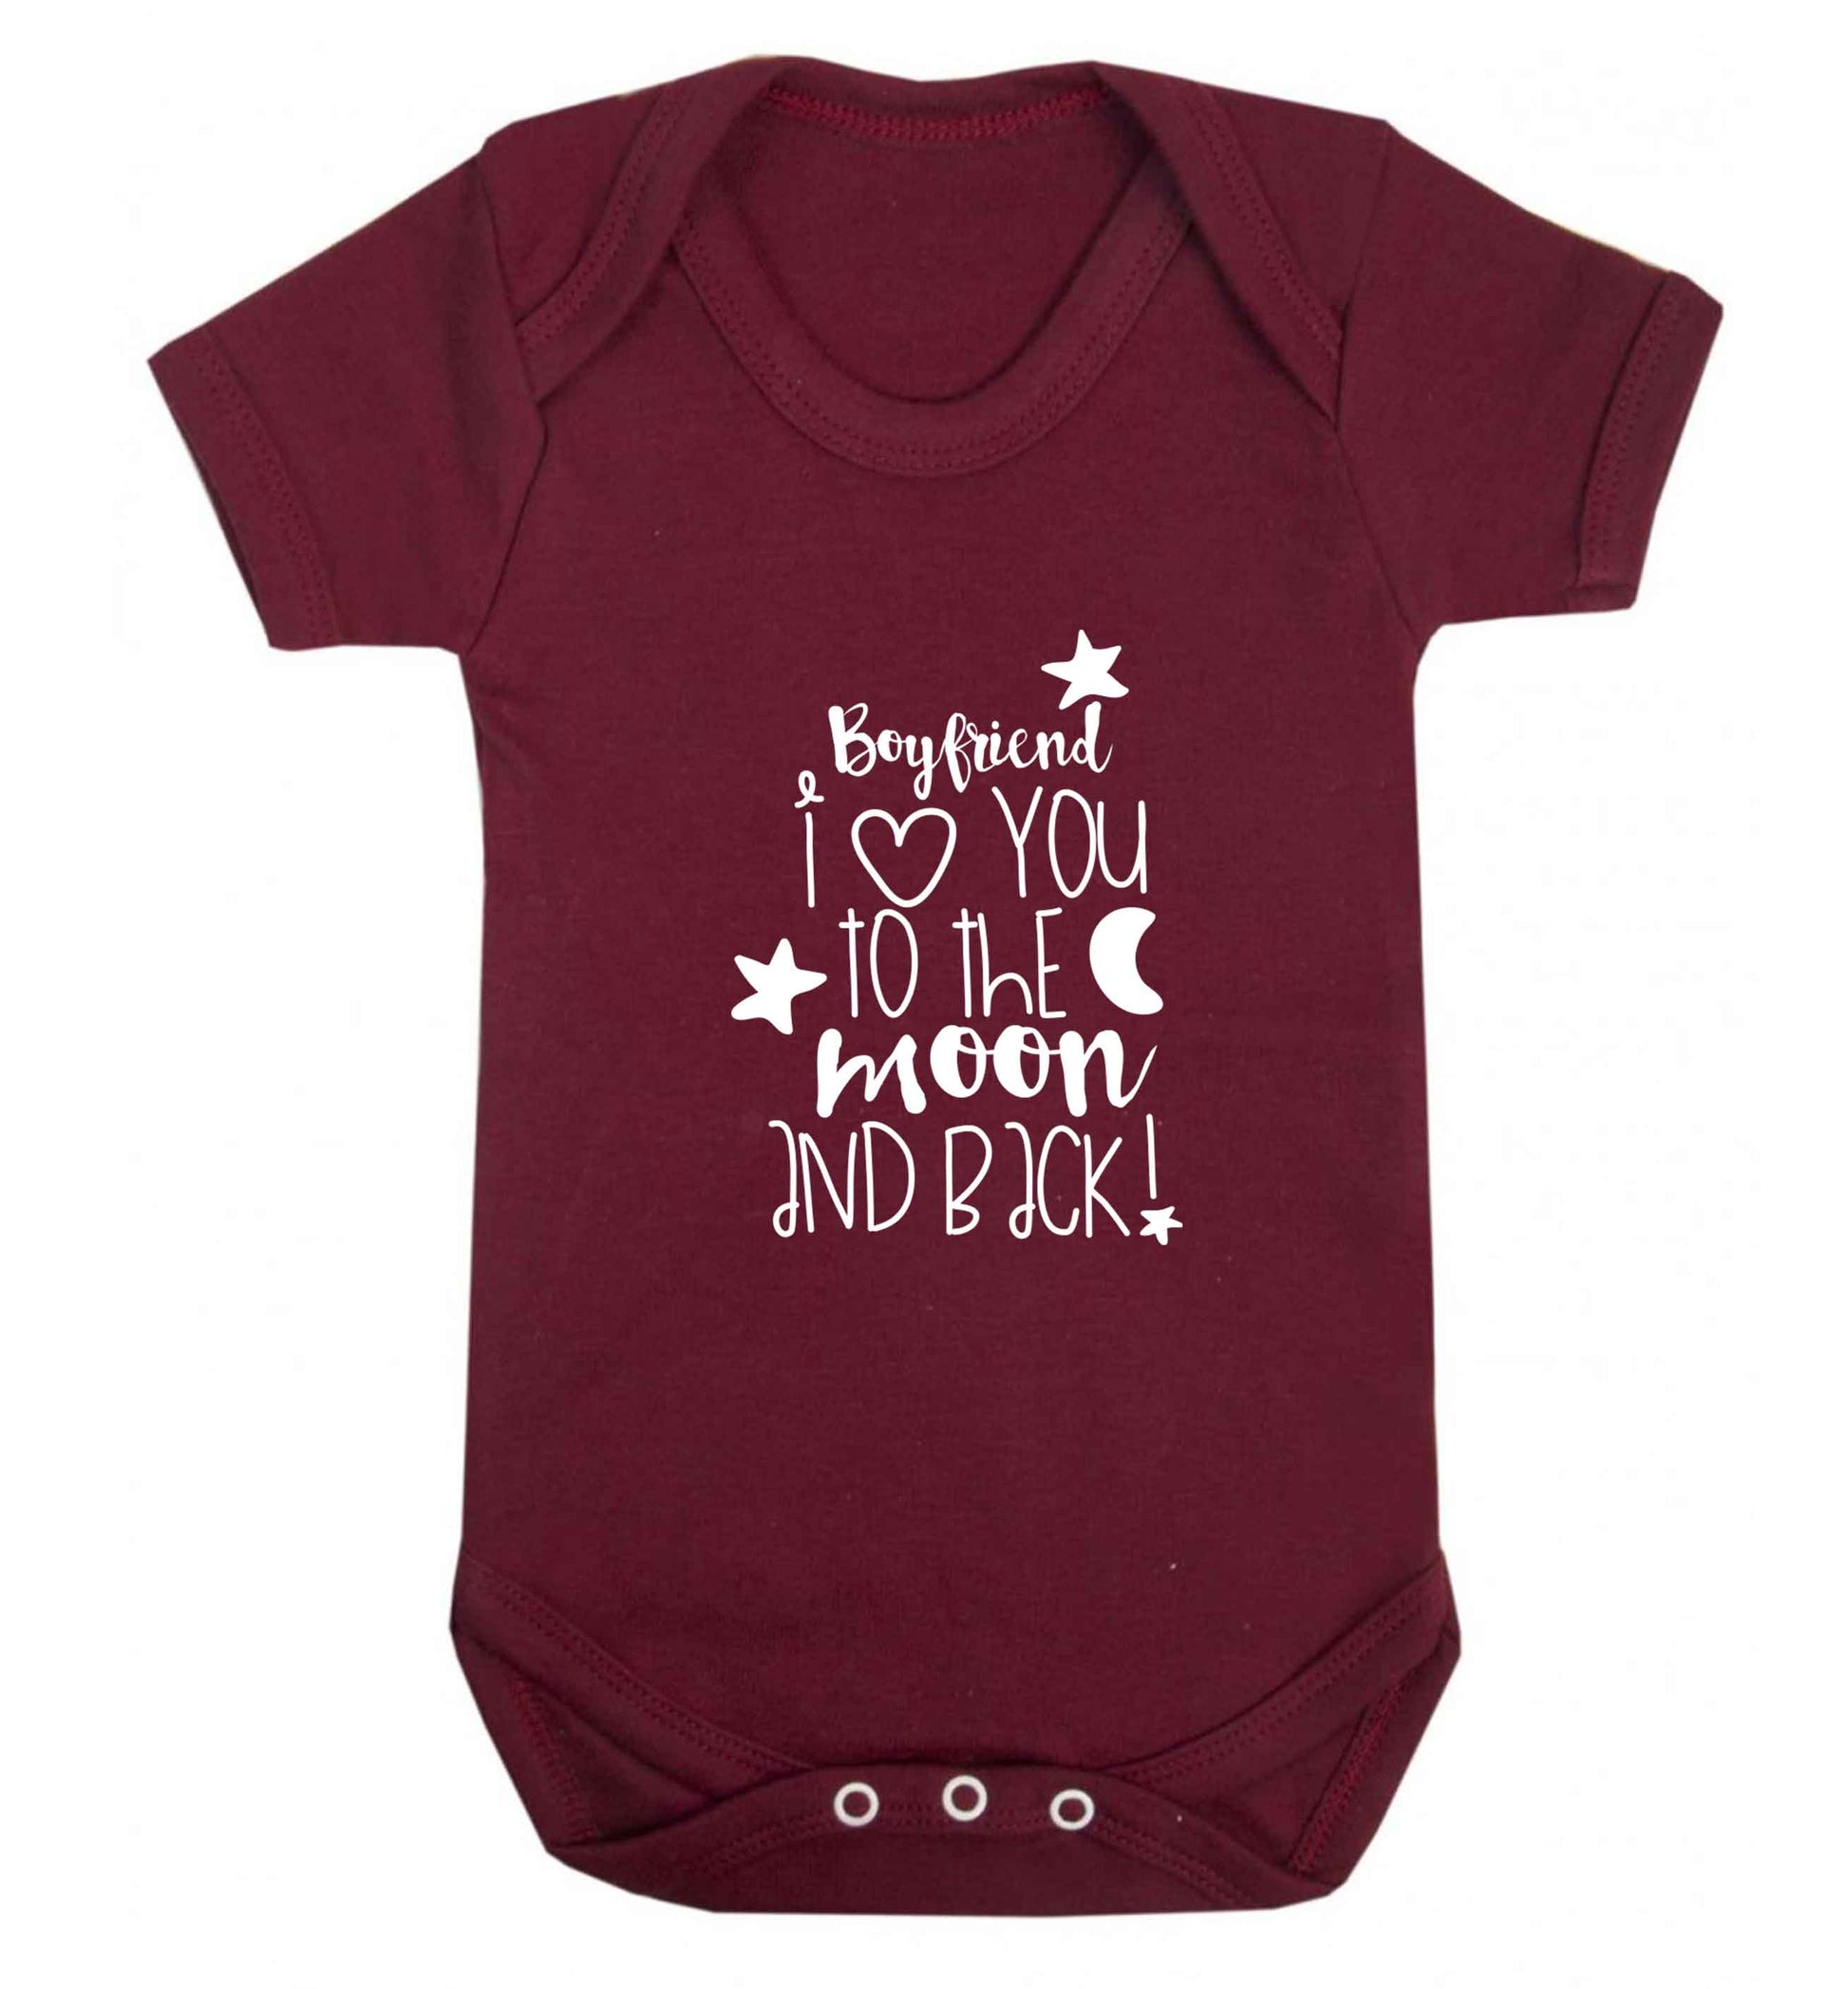 Boyfriend I love you to the moon and back baby vest maroon 18-24 months